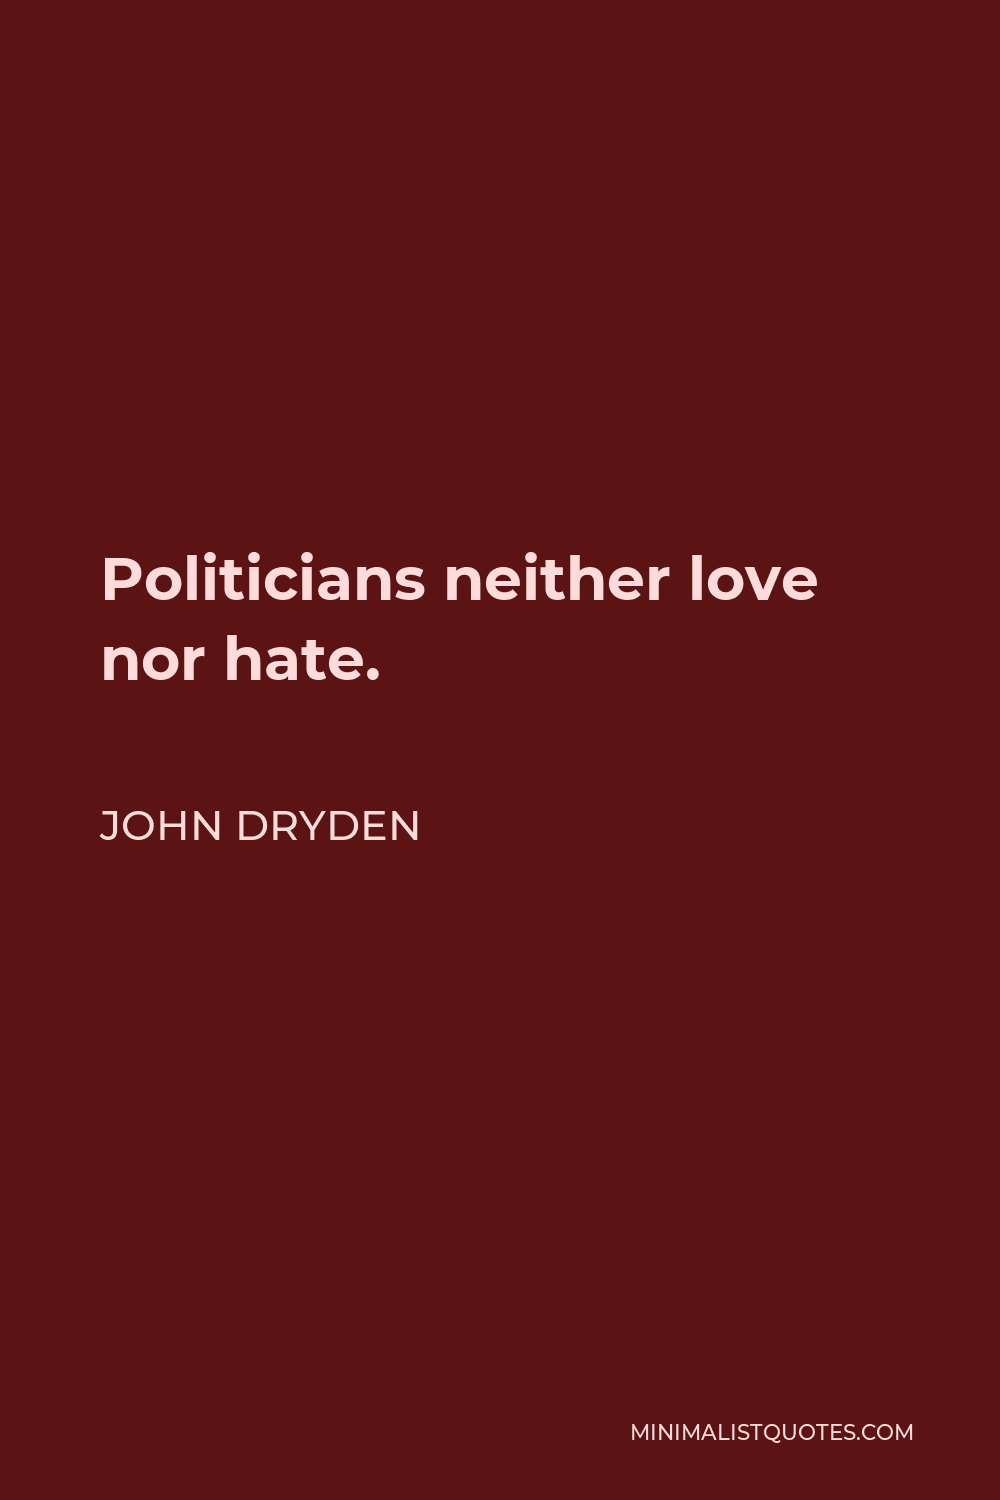 John Dryden Quote - Politicians neither love nor hate.